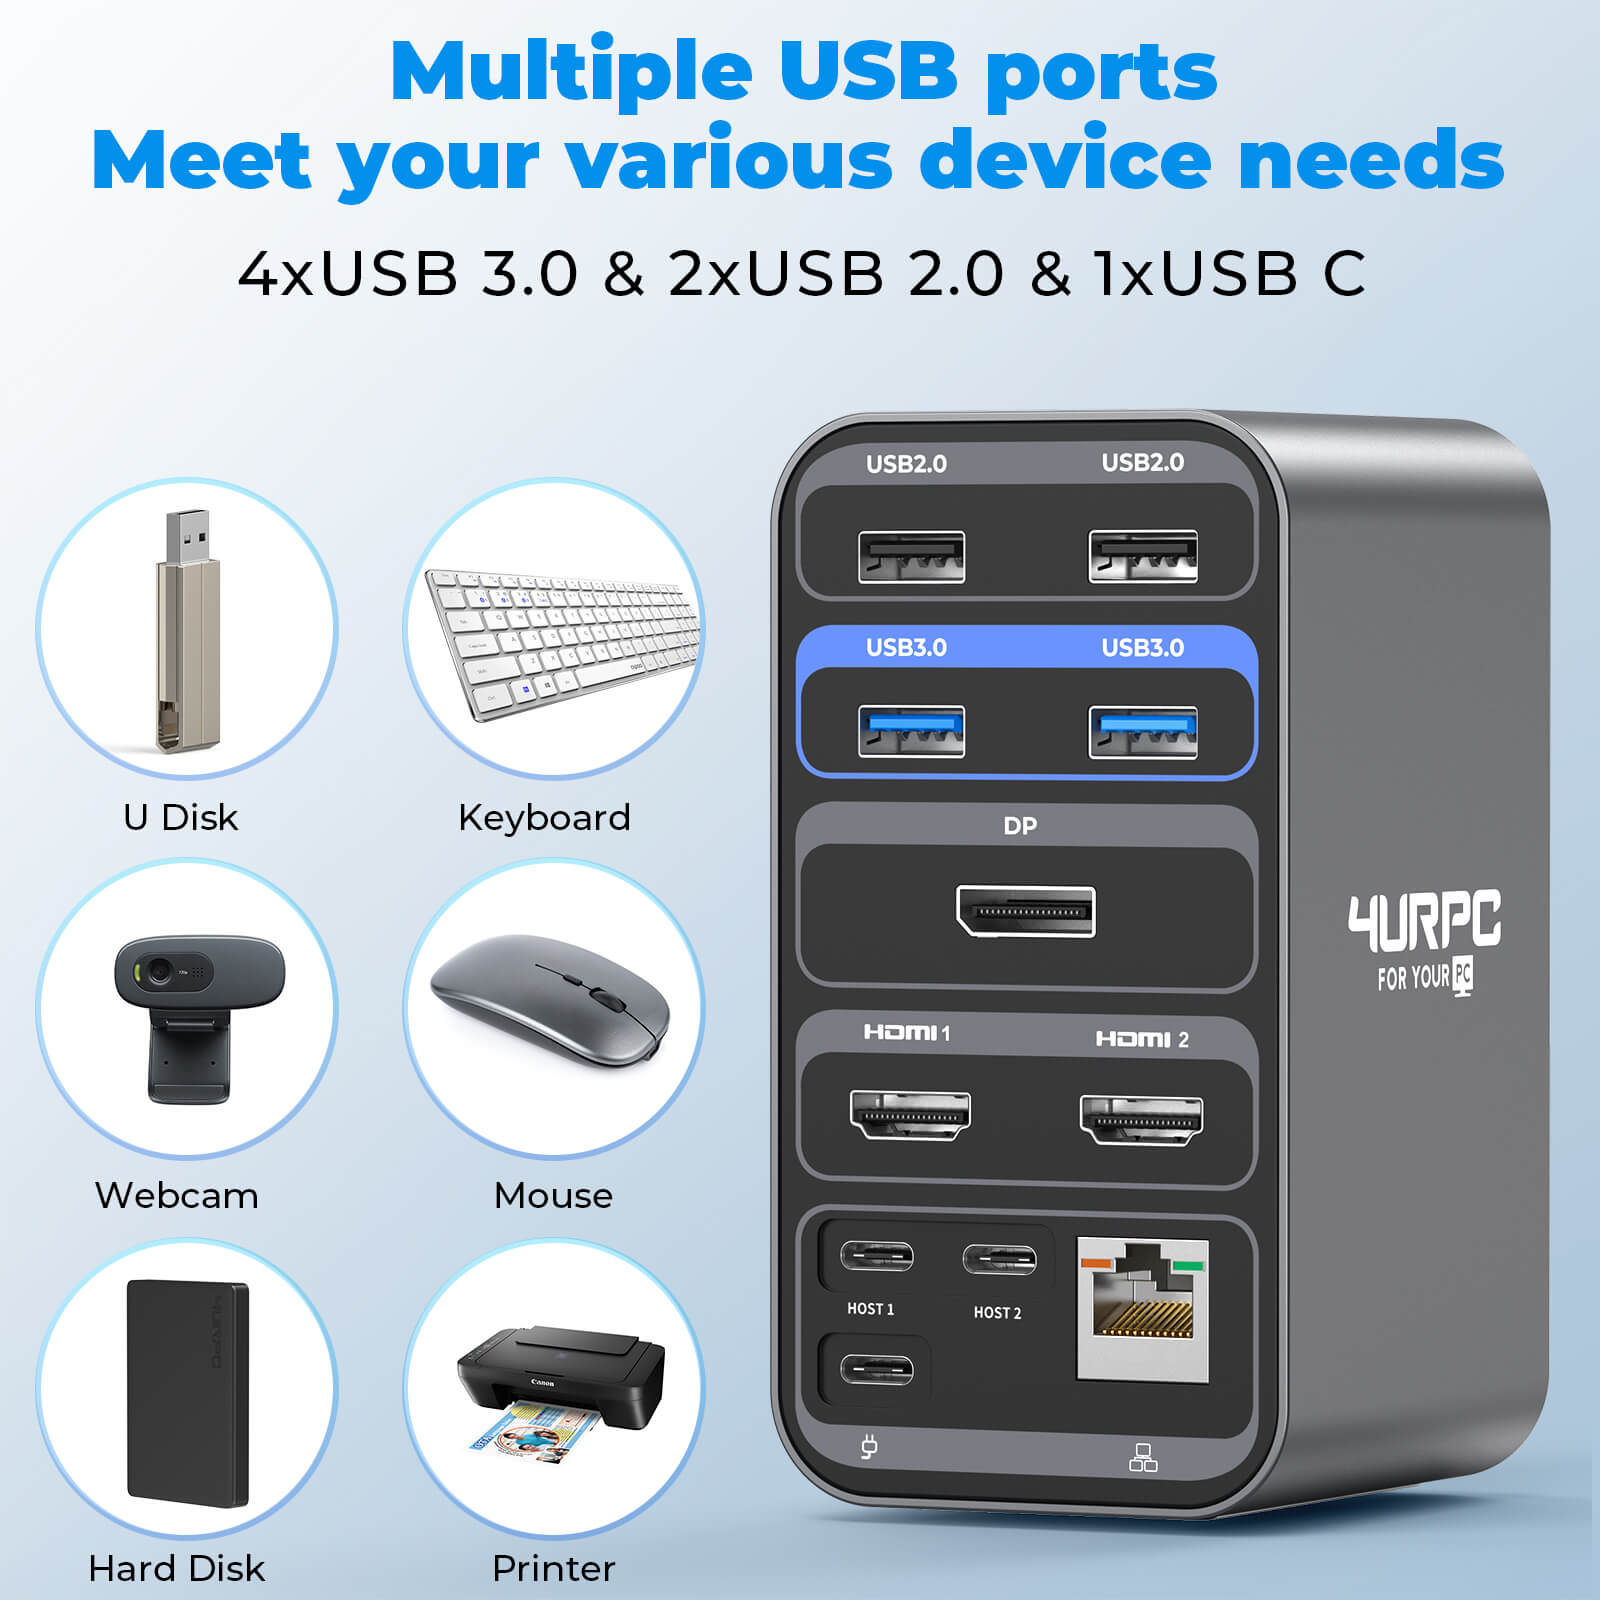 DSC03 Docking Station with Multiple USB ports Meet your various device needs